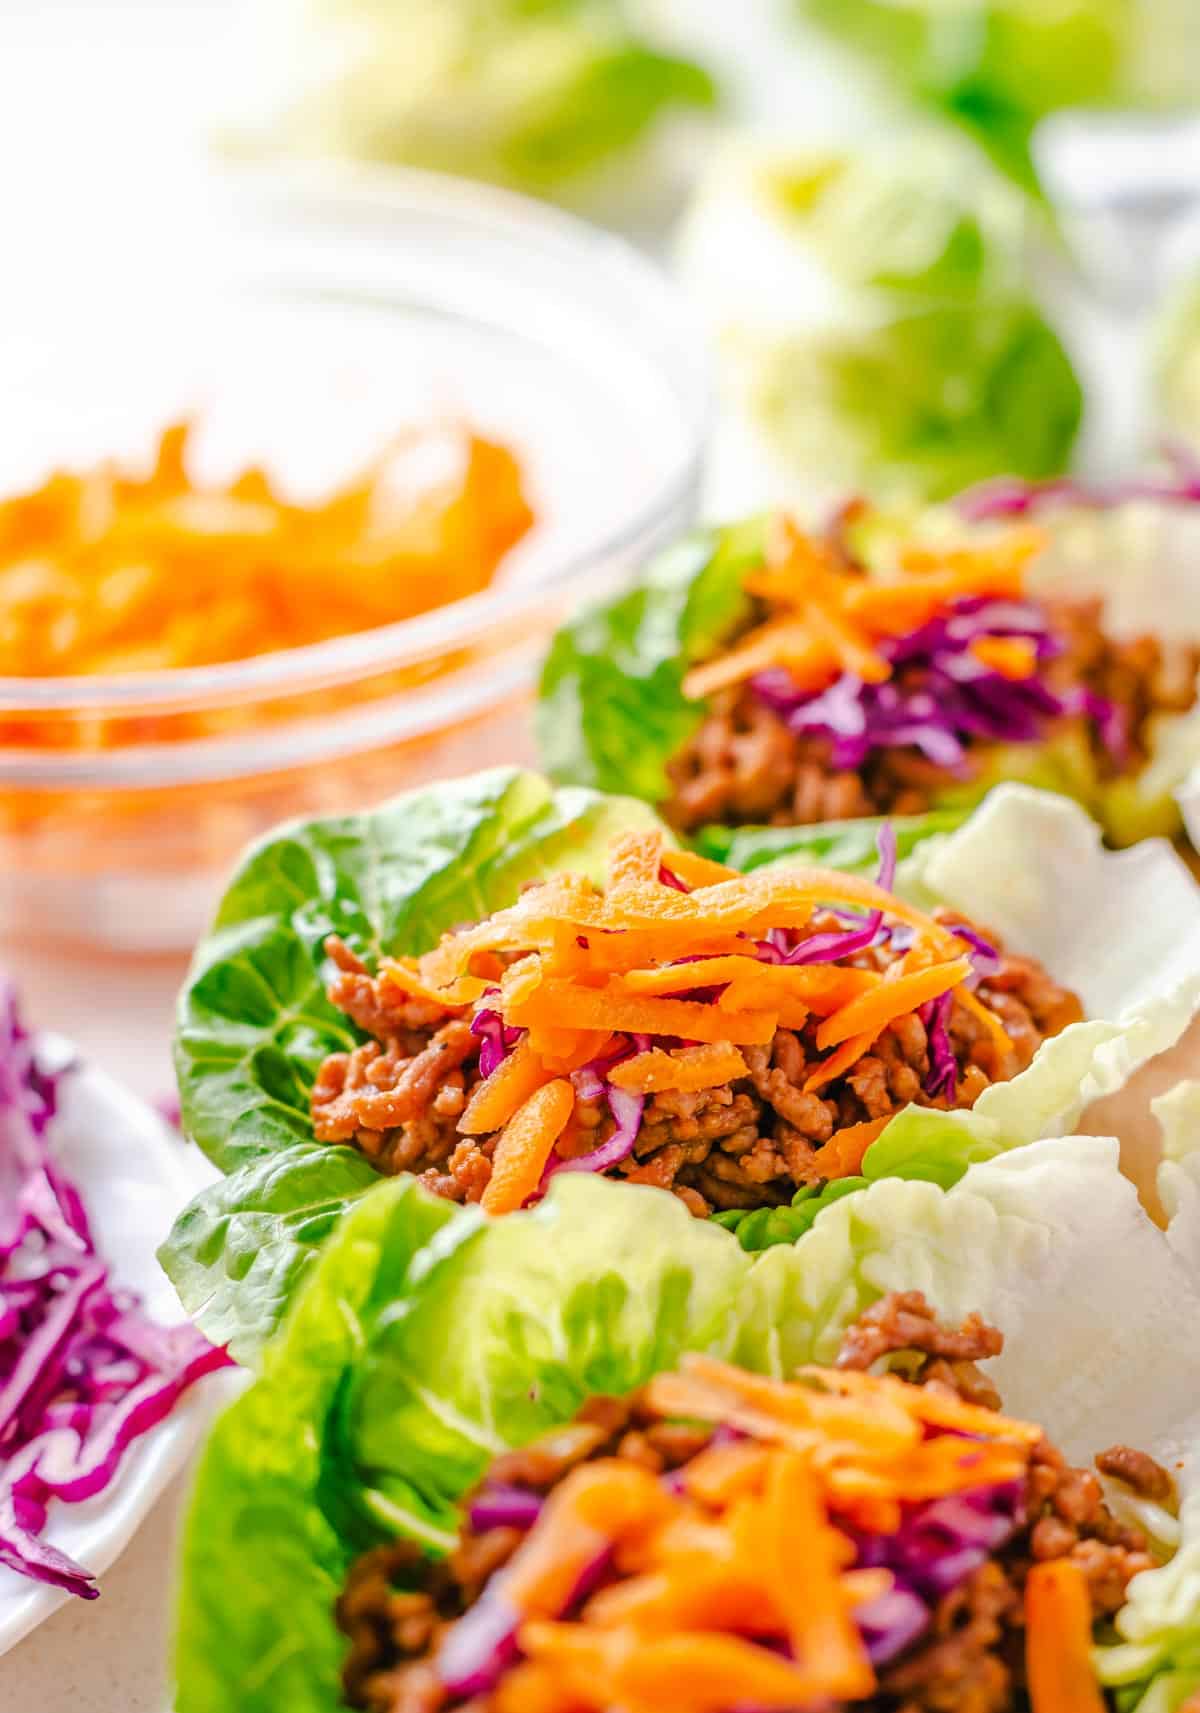 Profile view of three lettuce wraps with ground beef with one in the middle, in focus.